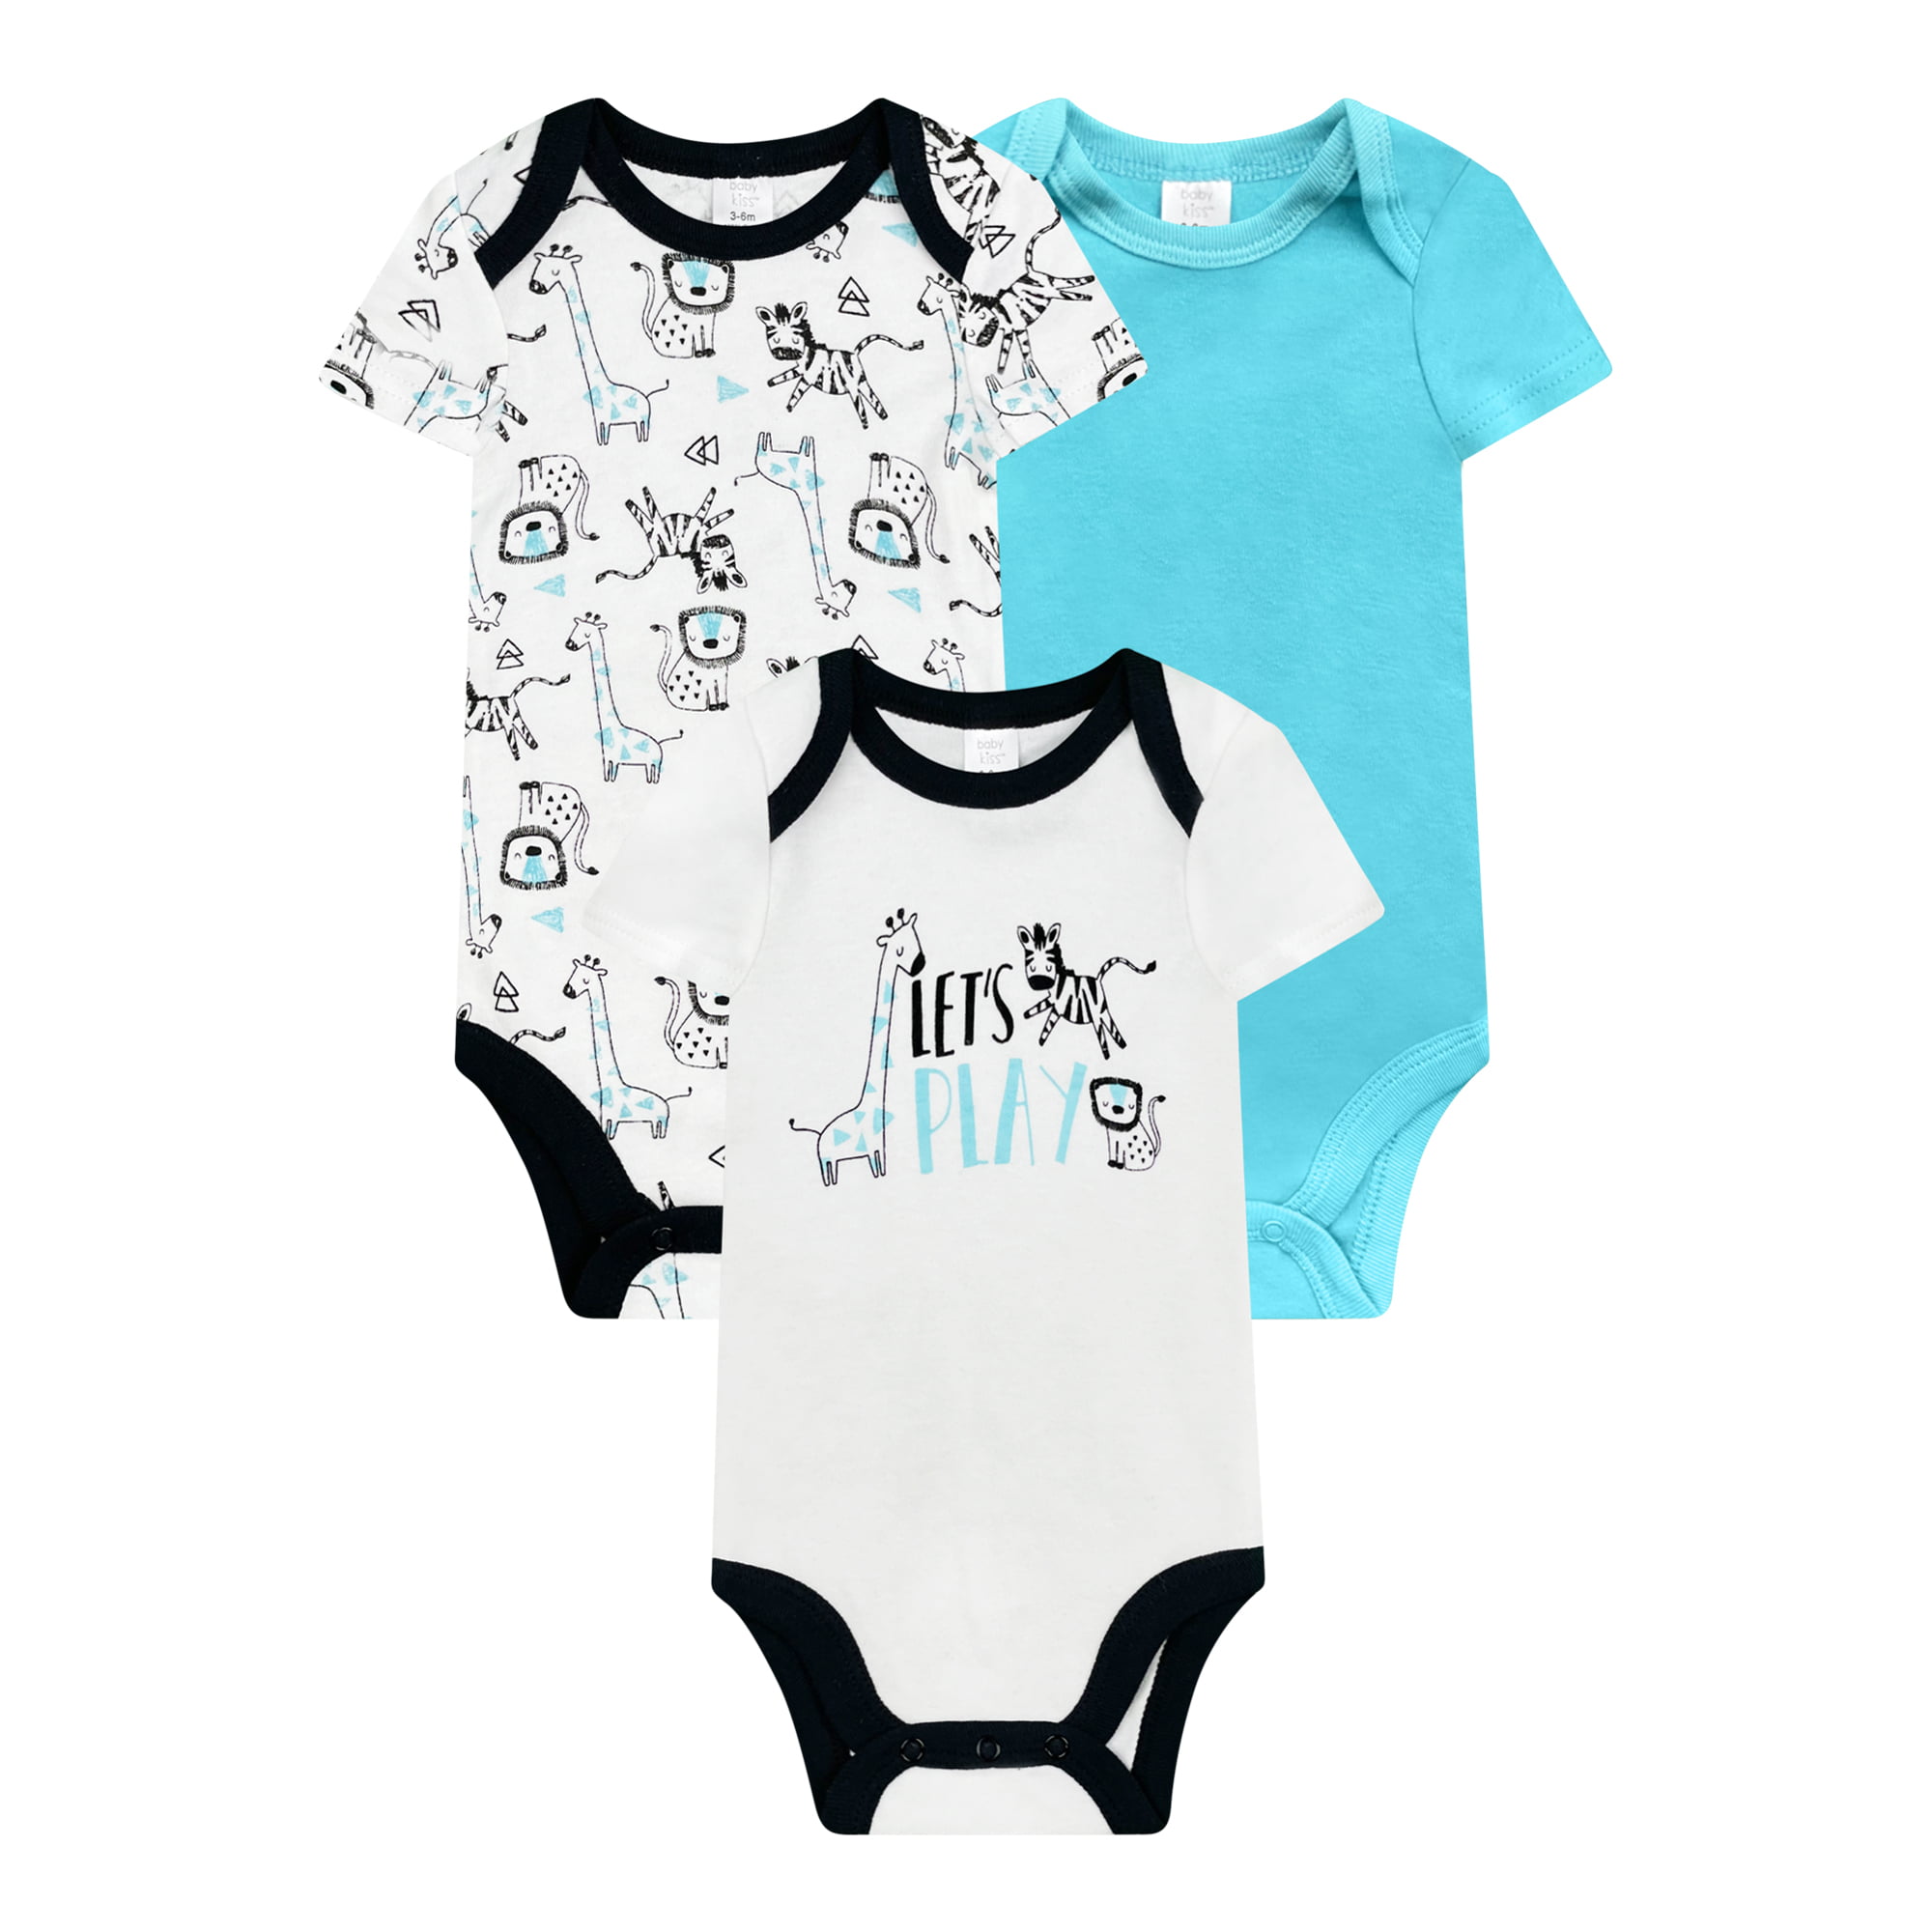 BABY KISS 3-Pack Bodysuits For Baby Boys Short Sleeve Baby Onesies For Newborn & Infants 100% Cotton 